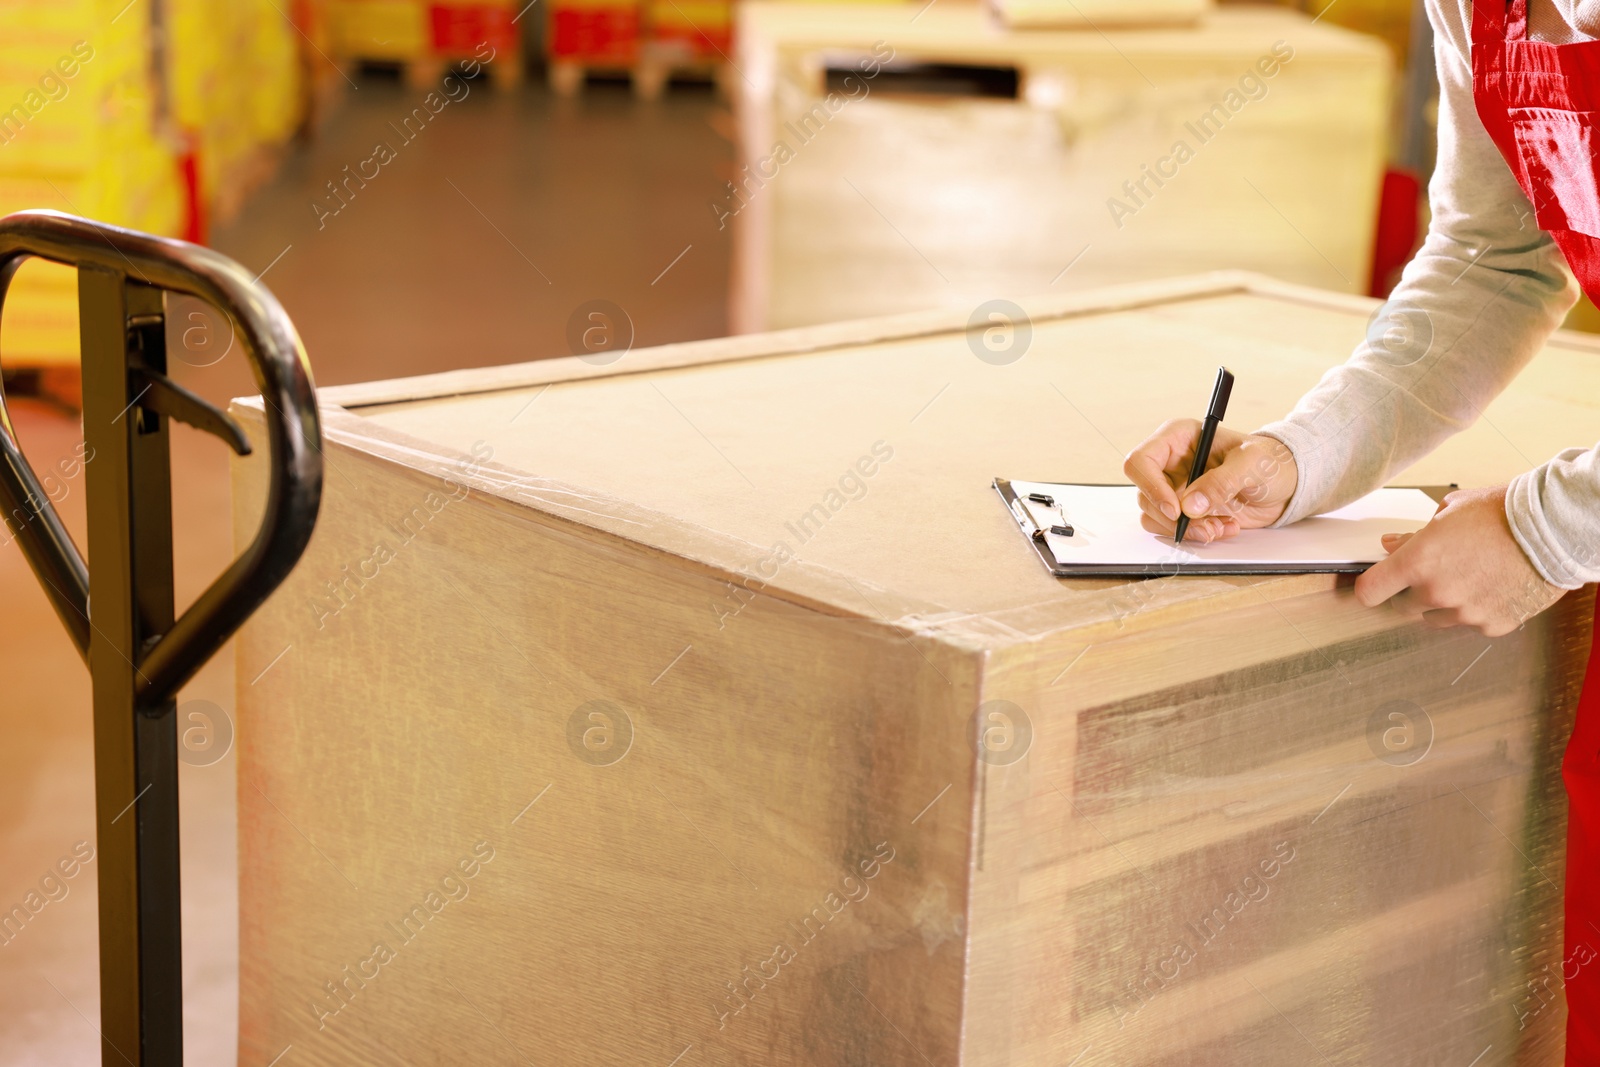 Image of Worker with clipboard near wrapped wooden pallets in warehouse, closeup